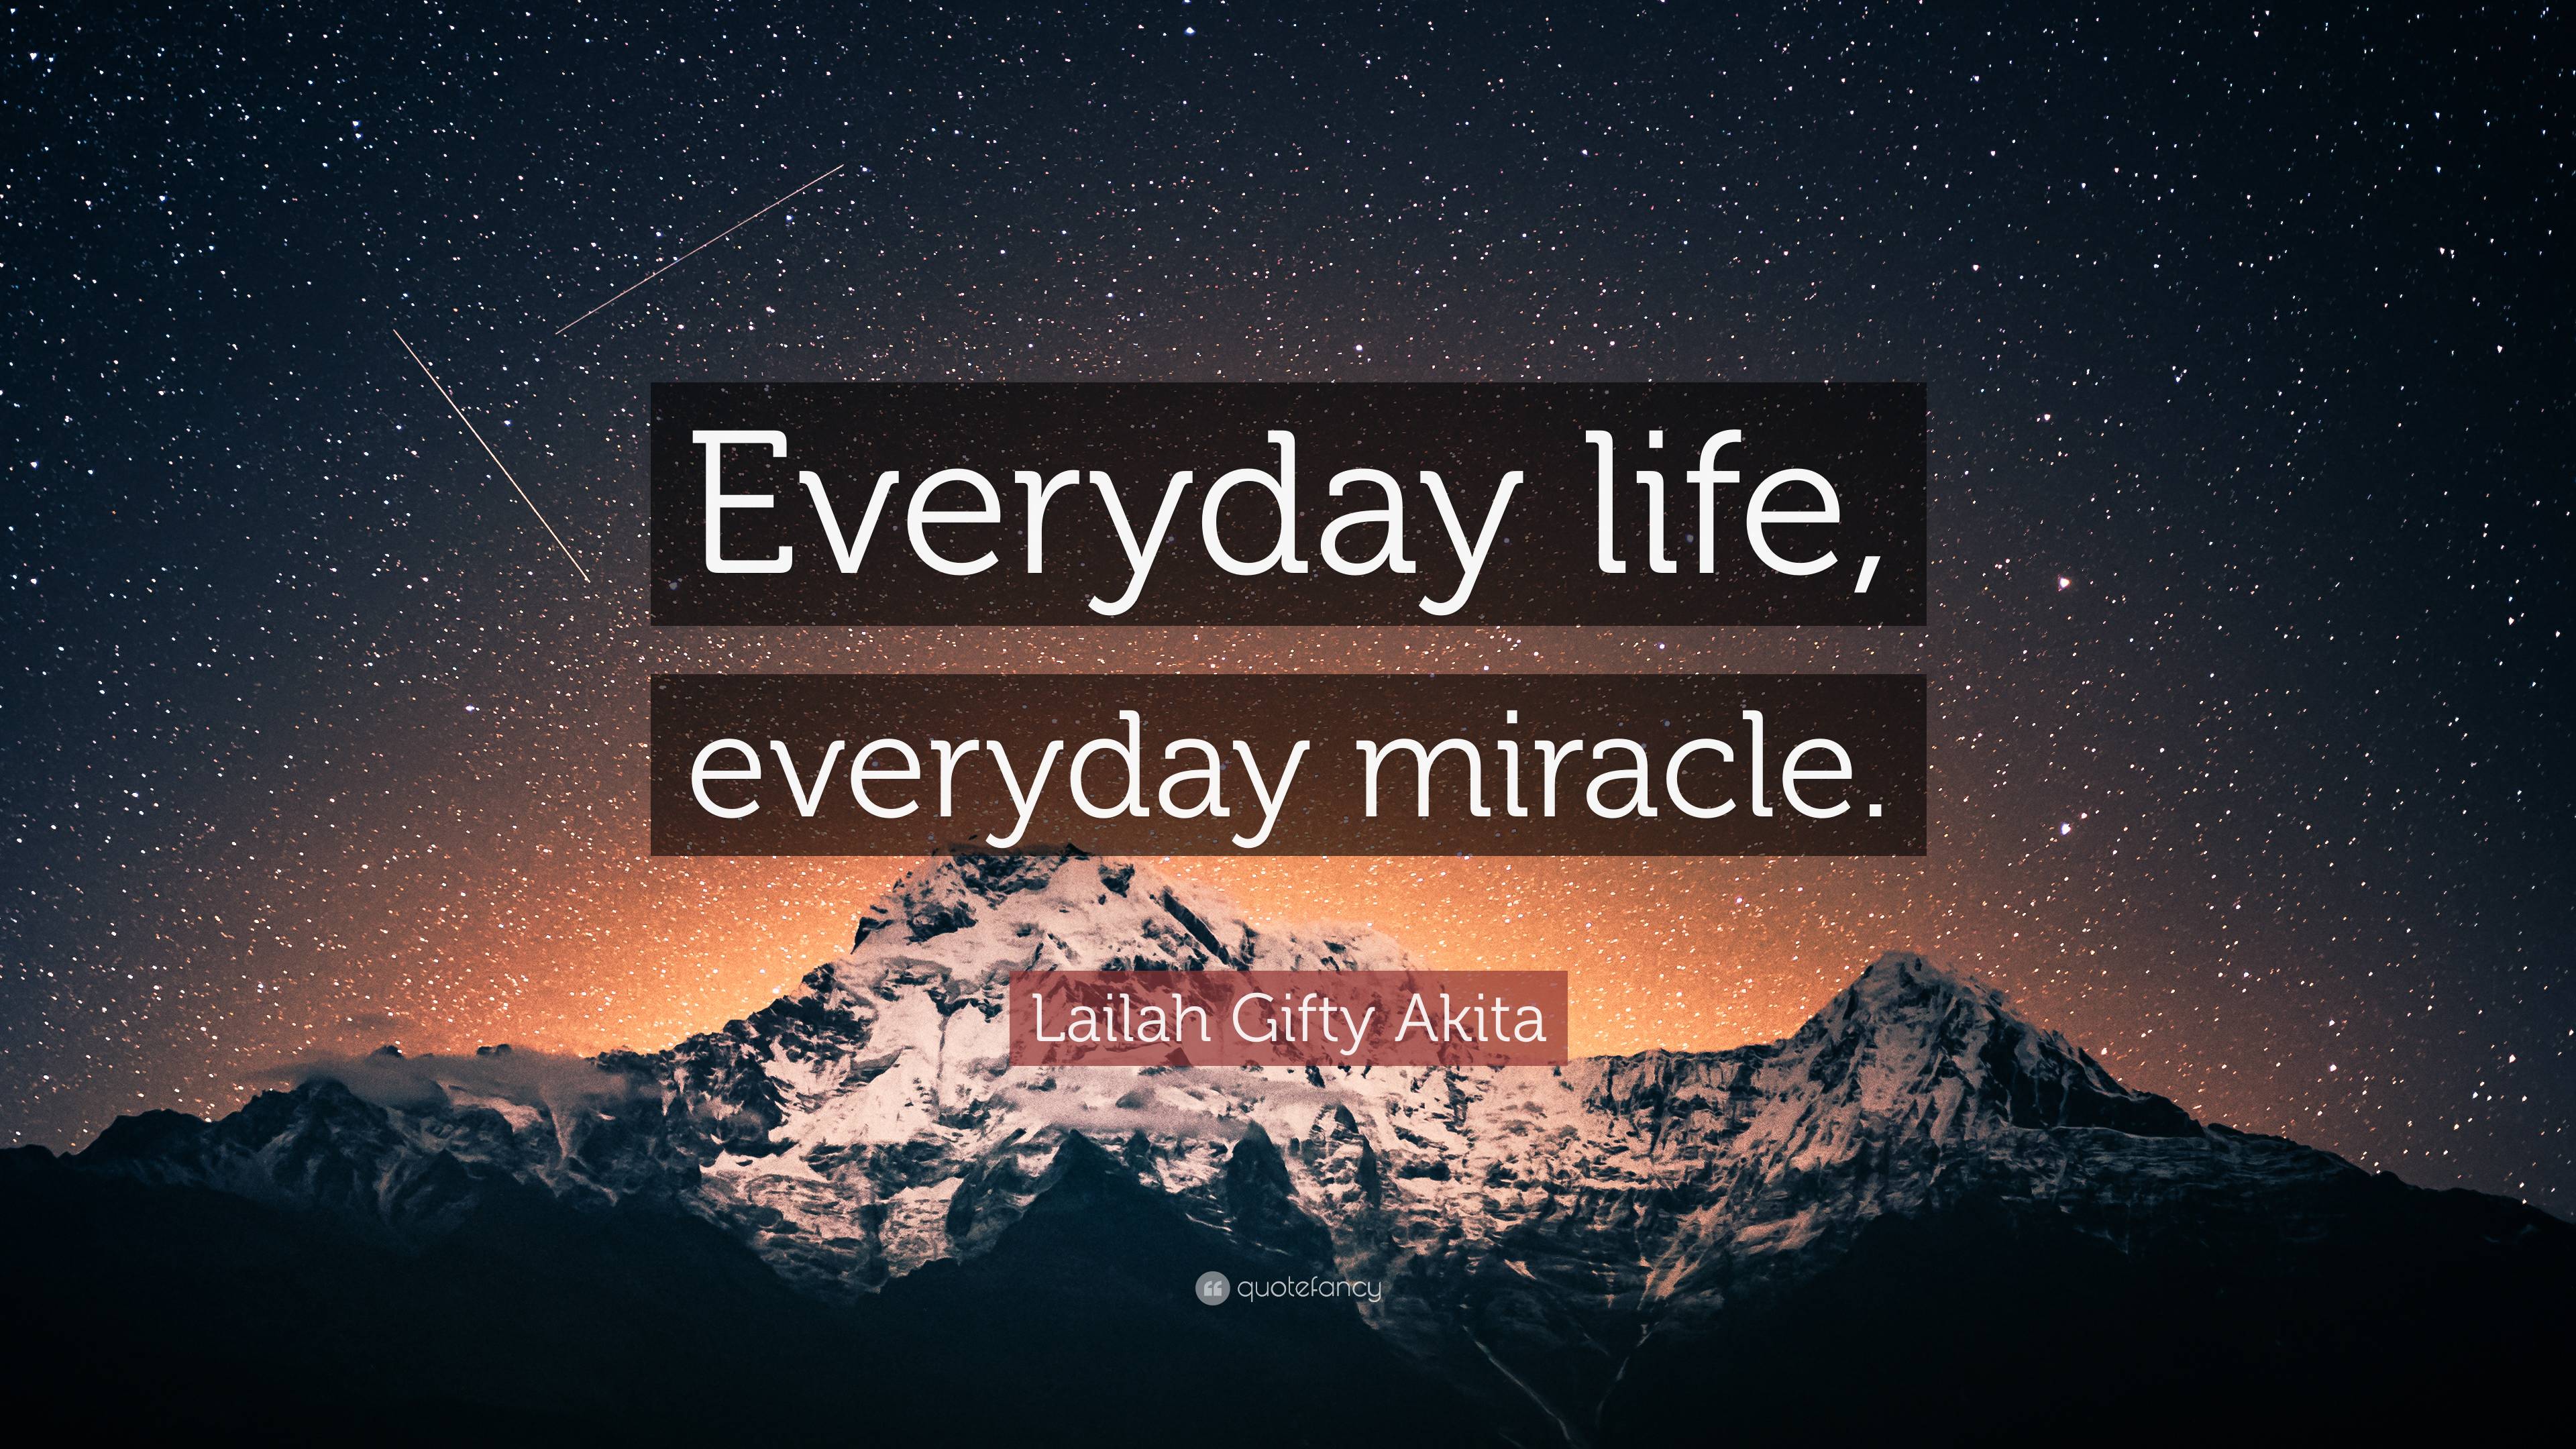 https://quotefancy.com/media/wallpaper/3840x2160/7551531-Lailah-Gifty-Akita-Quote-Everyday-life-everyday-miracle.jpg